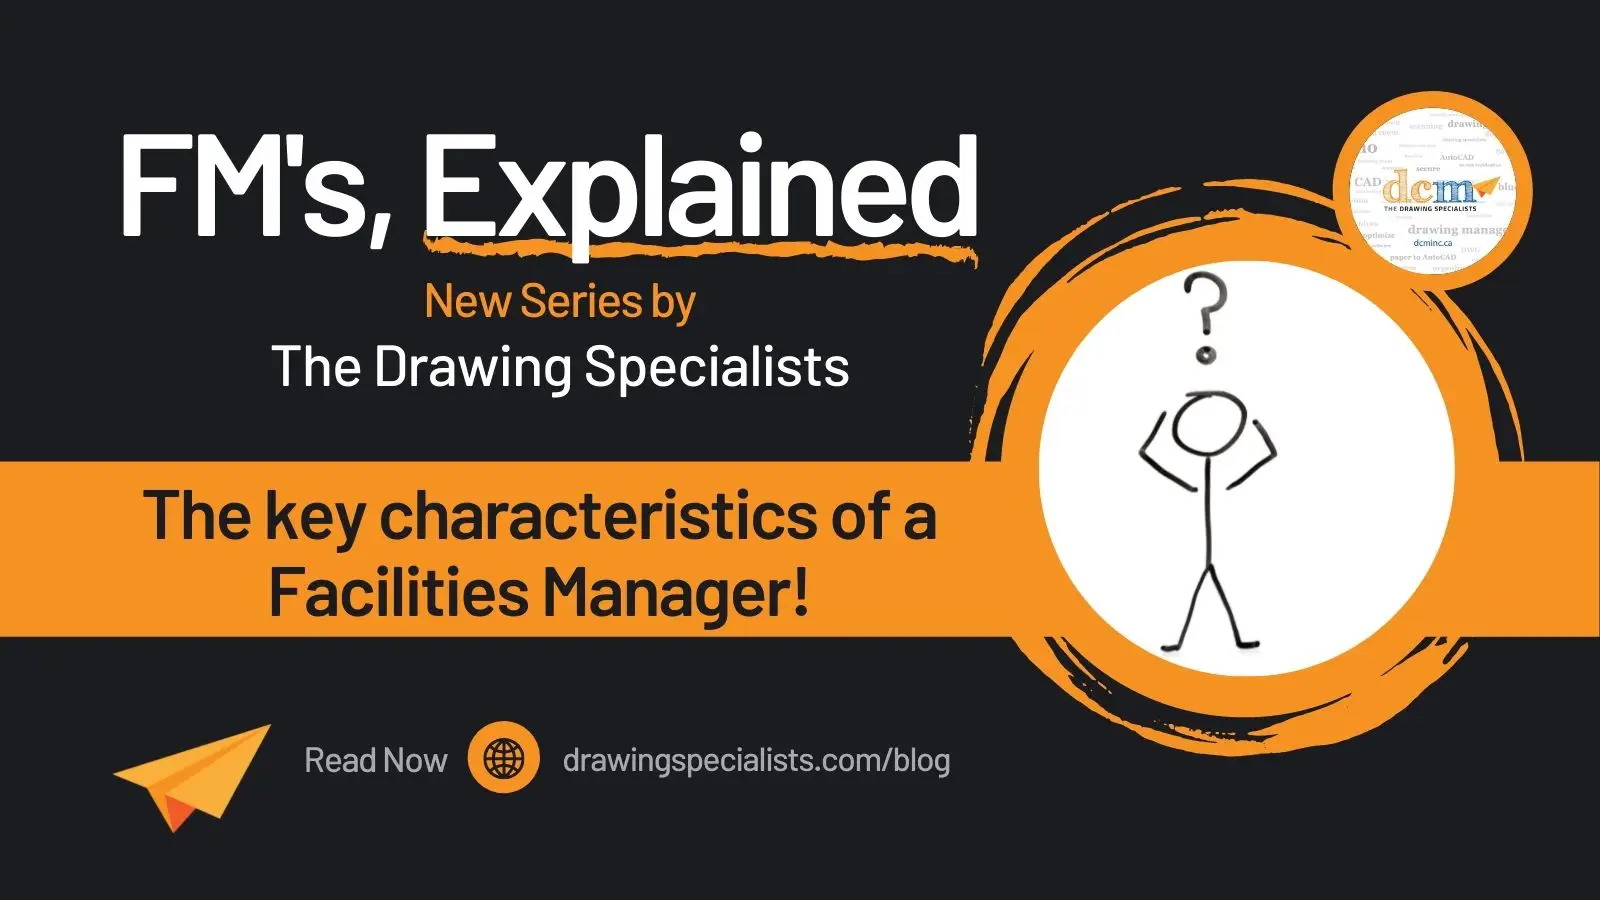 The key characteristics of a Facilities Manager – some may surprise you!